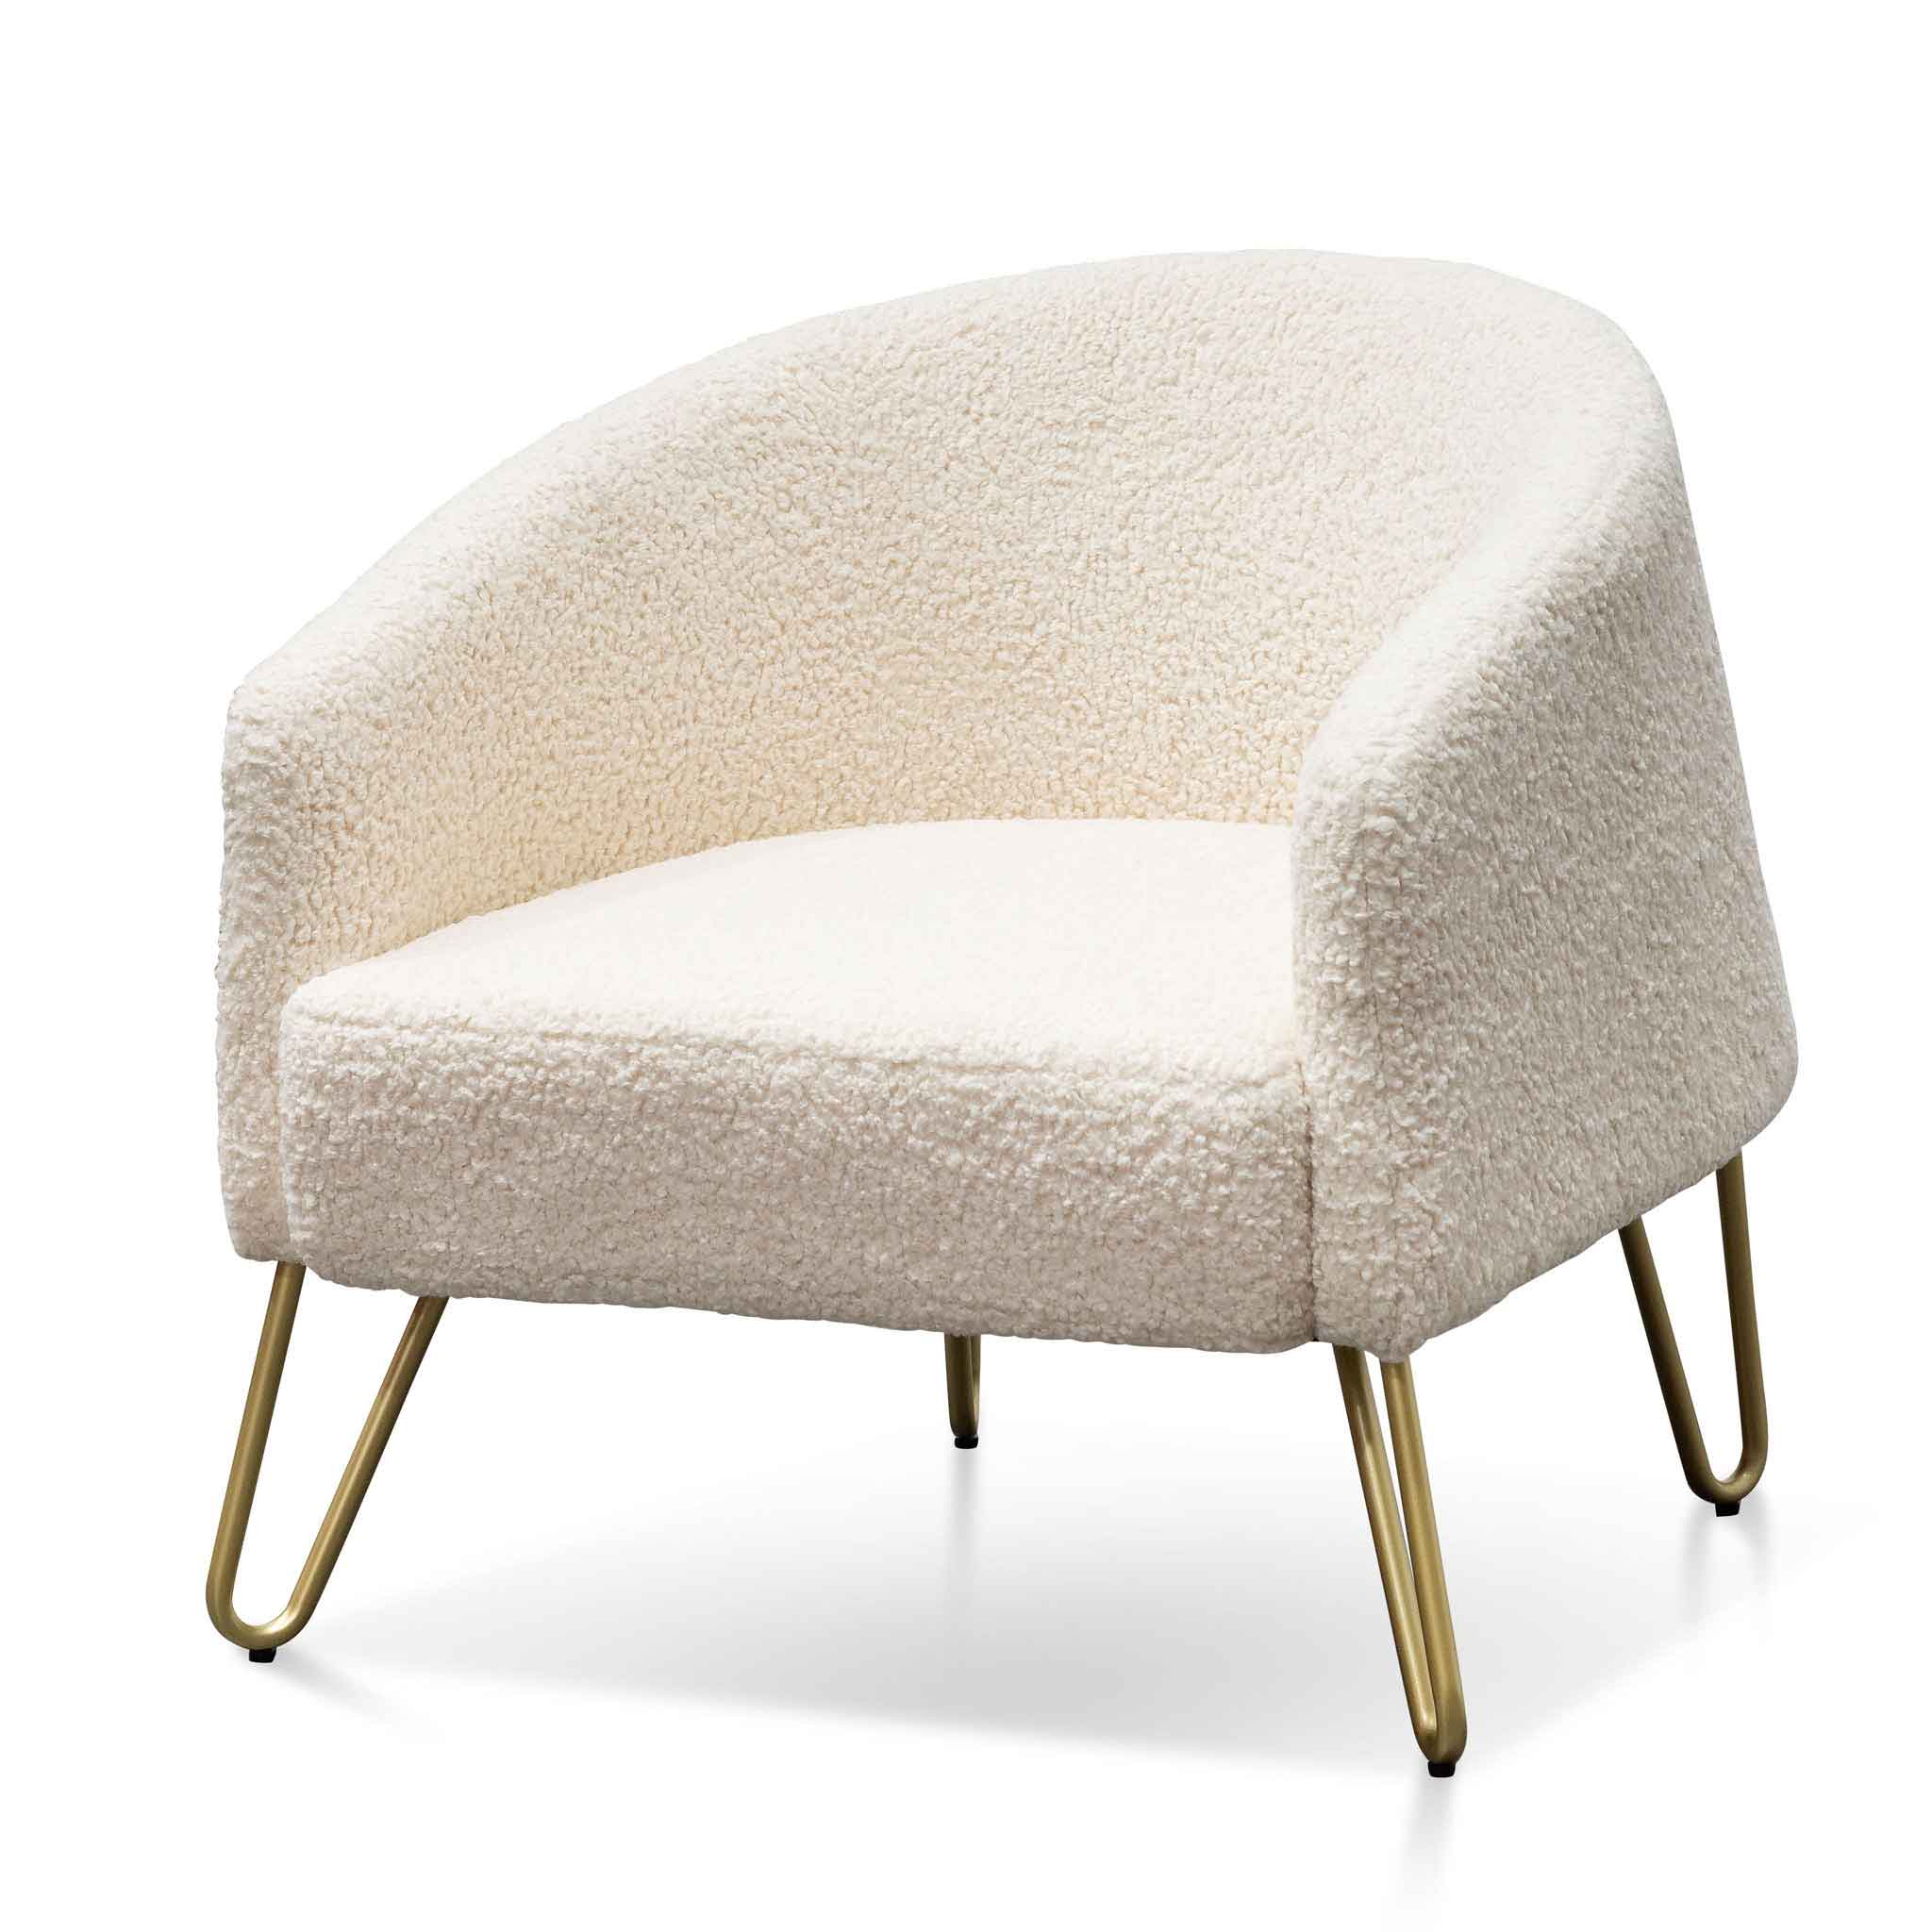 Serenity Armchair - Ivory White Synthetic Wool with Golden Legs